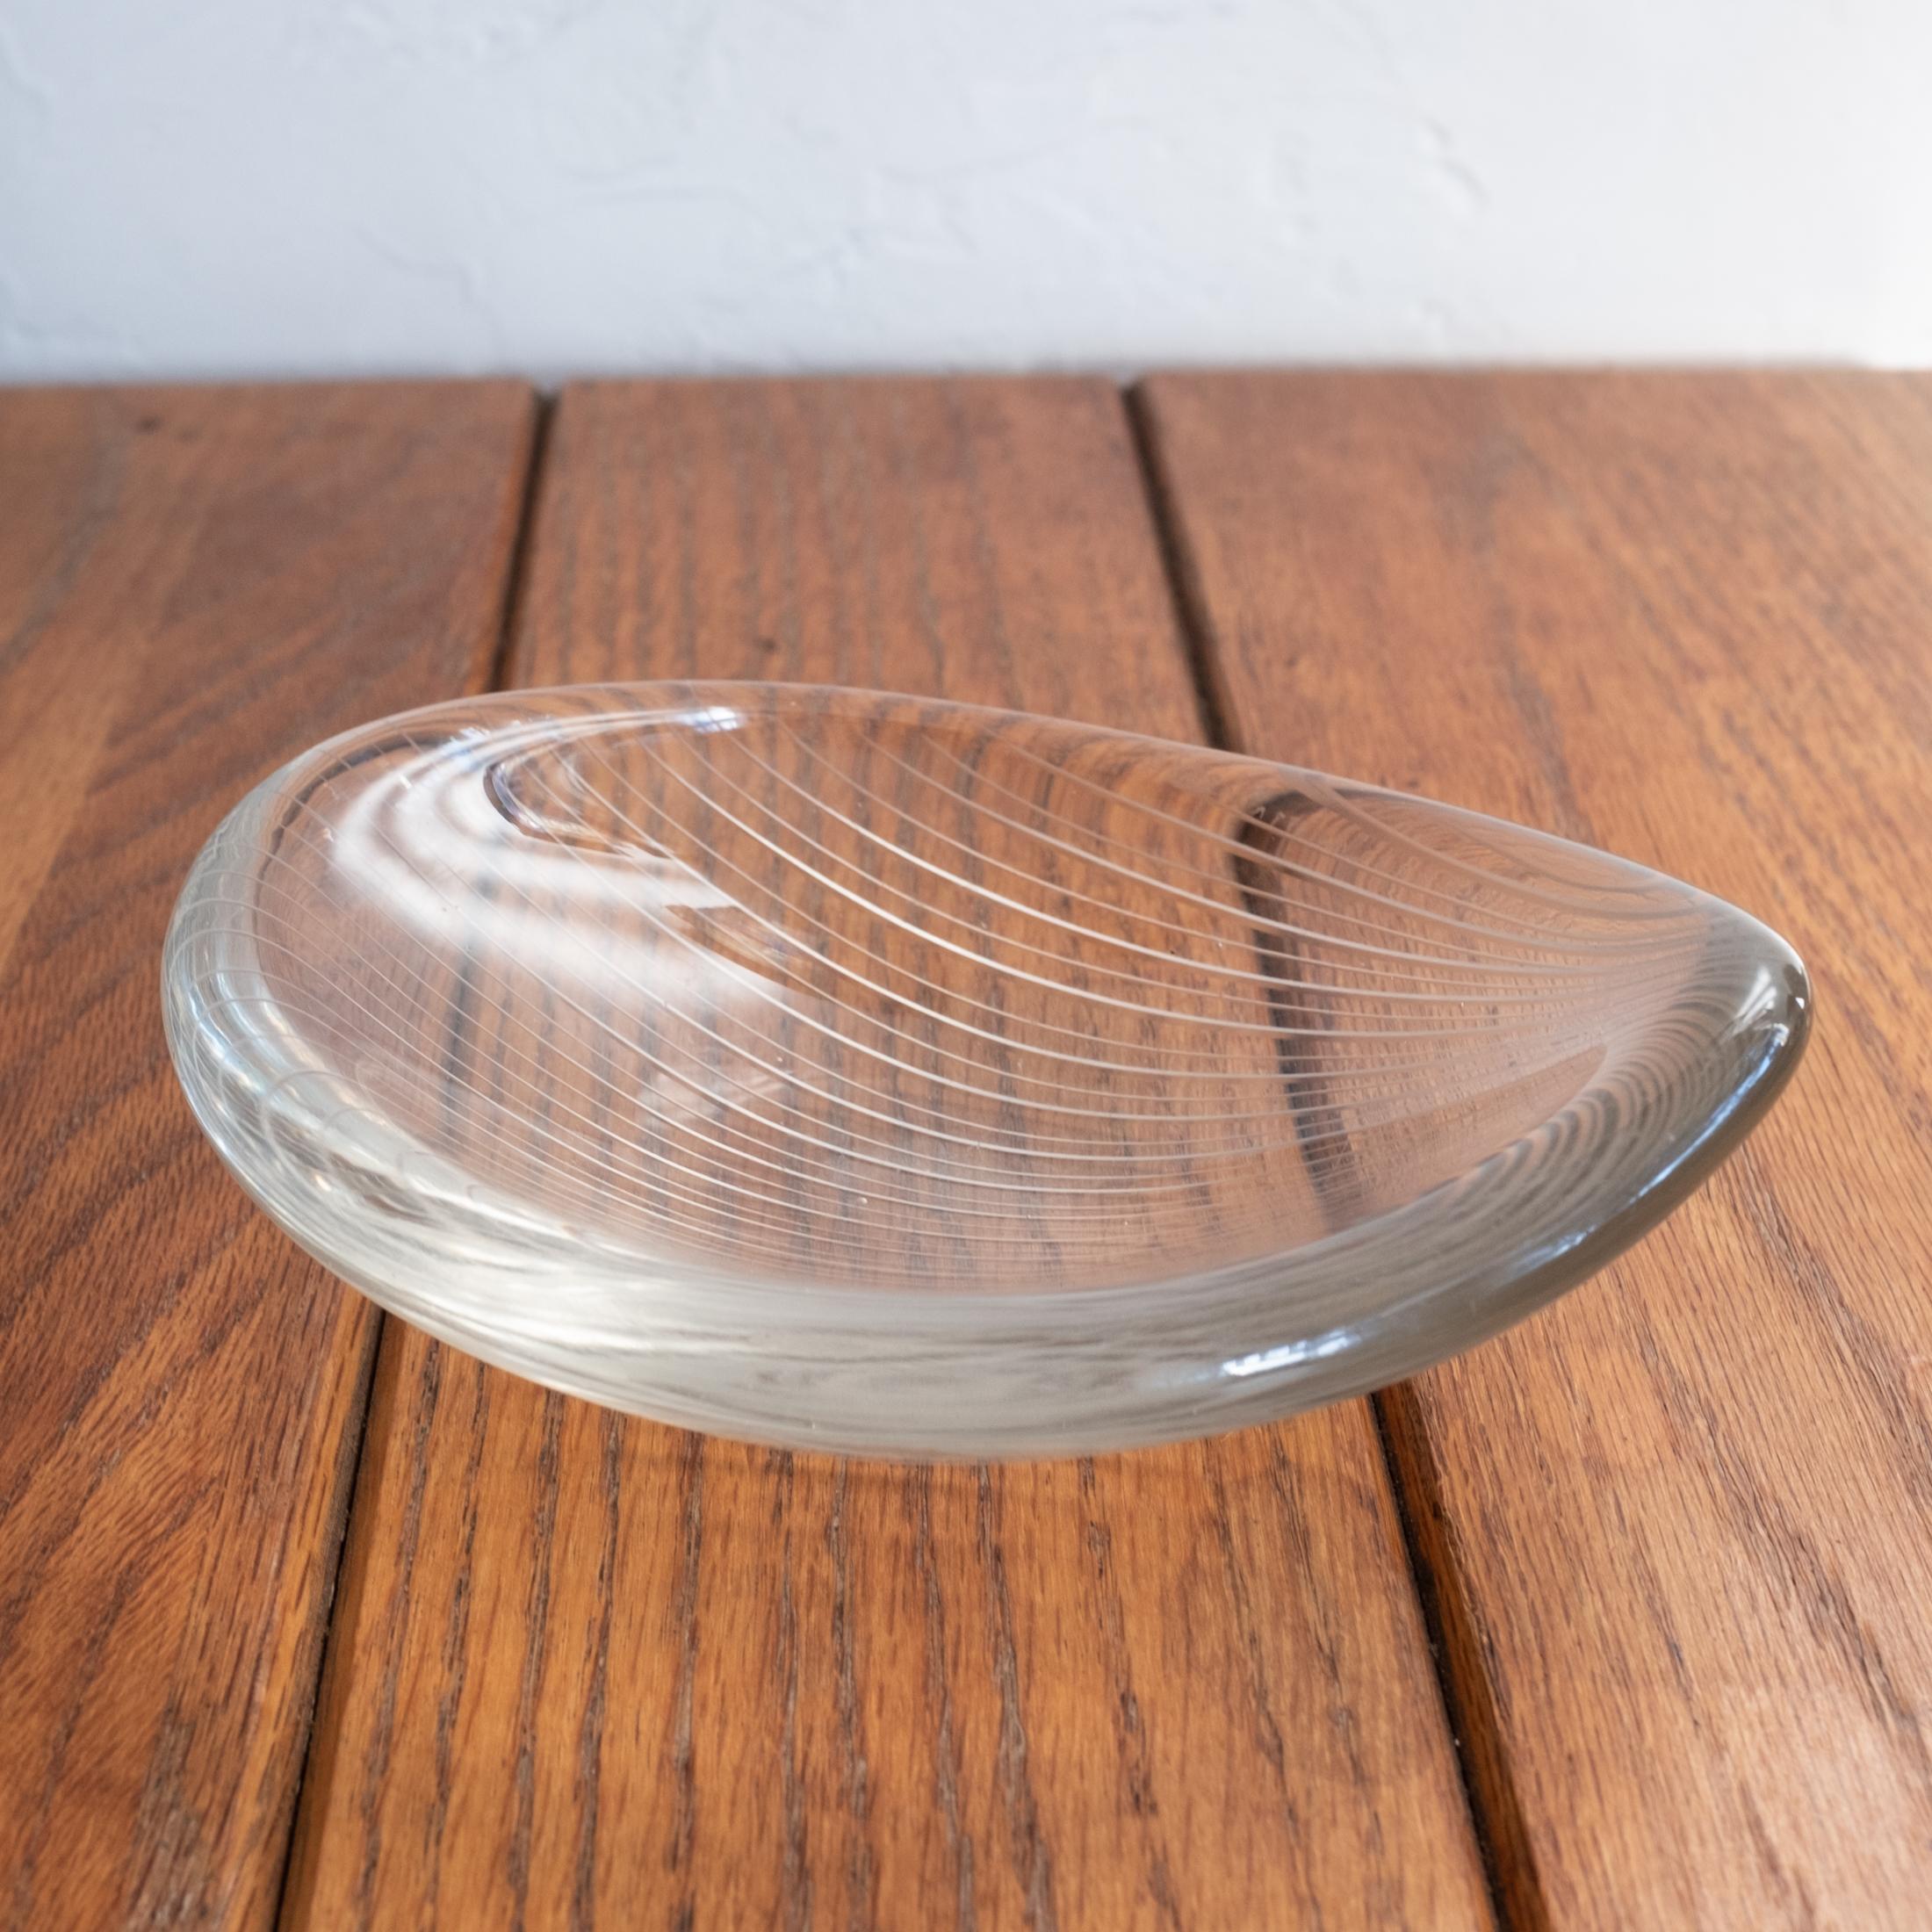 Crystal, line cut leaf bowl by Finnish artist and designer Tapio Wirkkala for Iittala. Wirkkala’s themes often come from nature, like leaves, water, or birds. Designed by Tapio Wirkkala in 1952 and produced by the Iittala glassworks between 1952 and